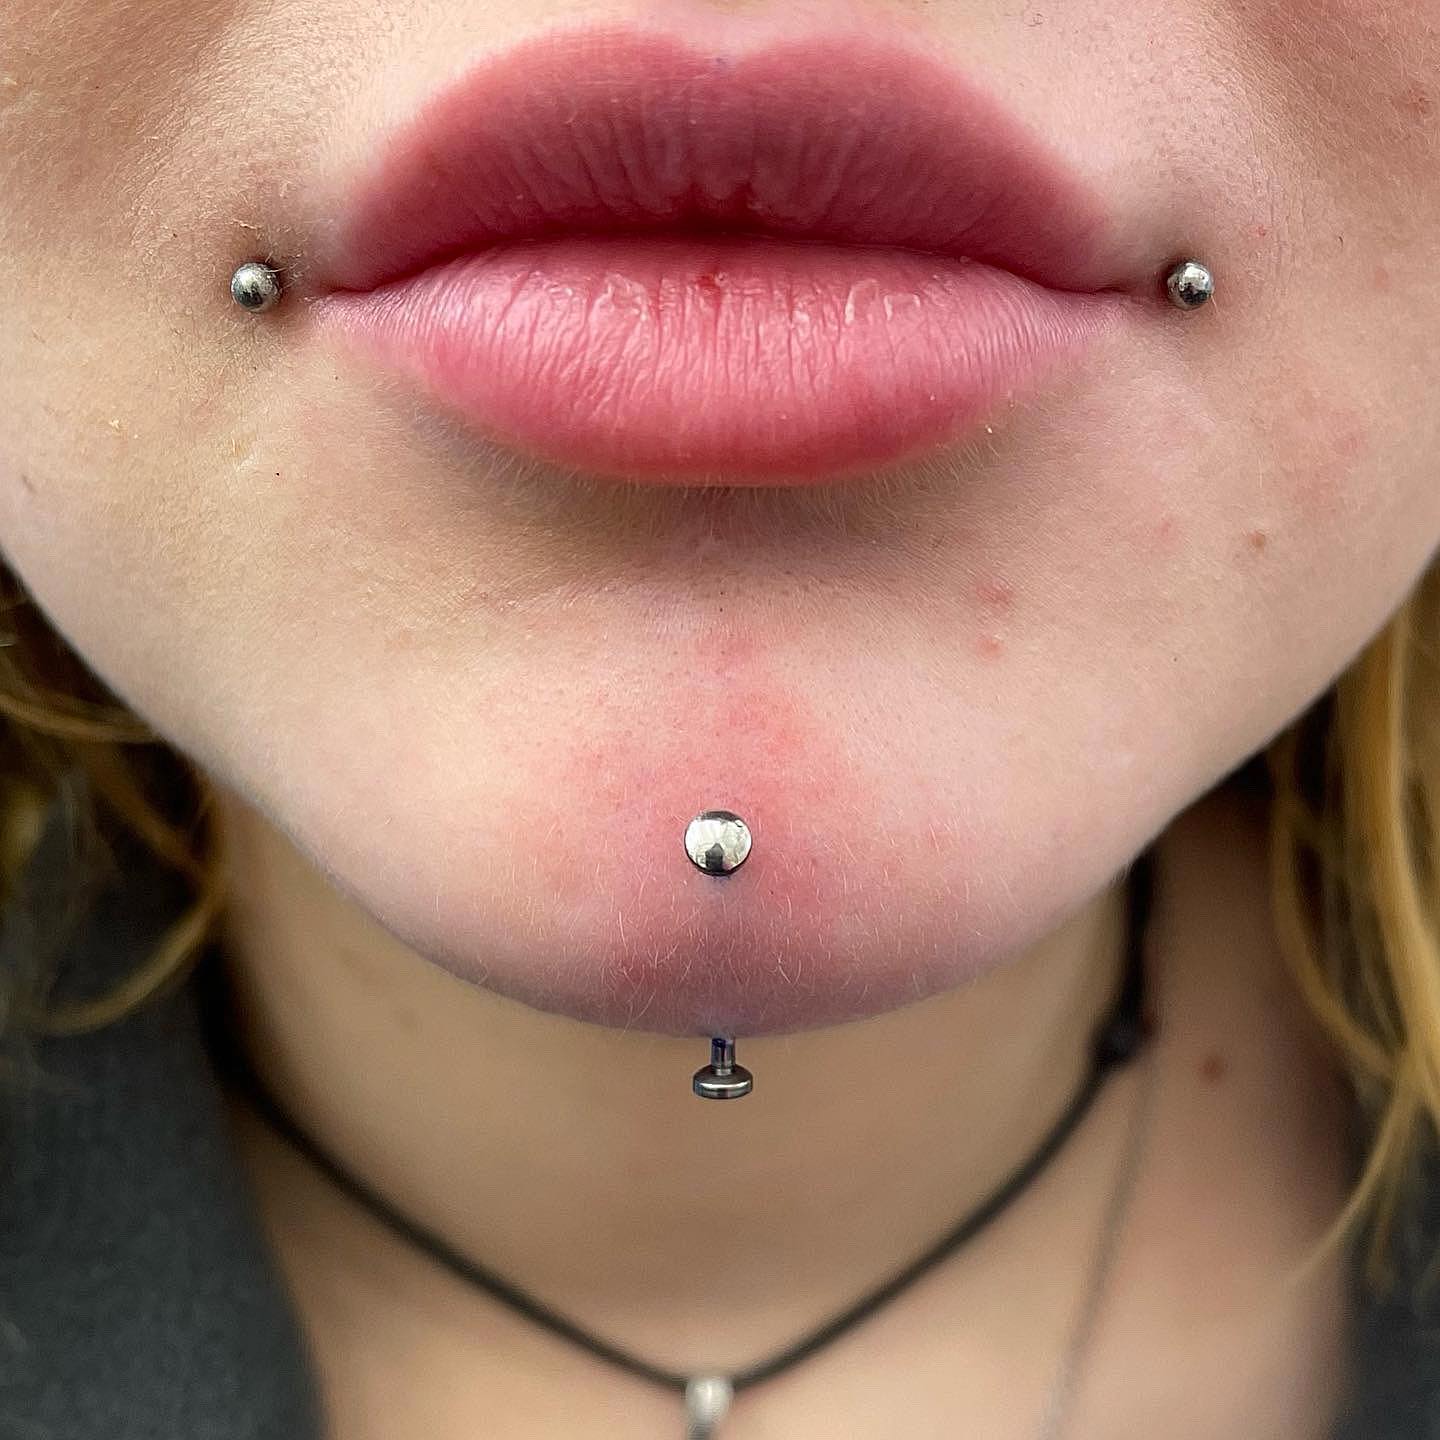 This was a Studio XIII first - a super cool chin piercing by our apprentice Reese! ✨ Done under the watchful eye of our very own Sarah 🫶🏻

Reese is taking appointments for specific piercings Wednesday through Saturday, and also has a walk-in slot on Saturdays for everything weird and wonderful ✨

Check out her page for more information - piercingsbyreese 

  piercing                    